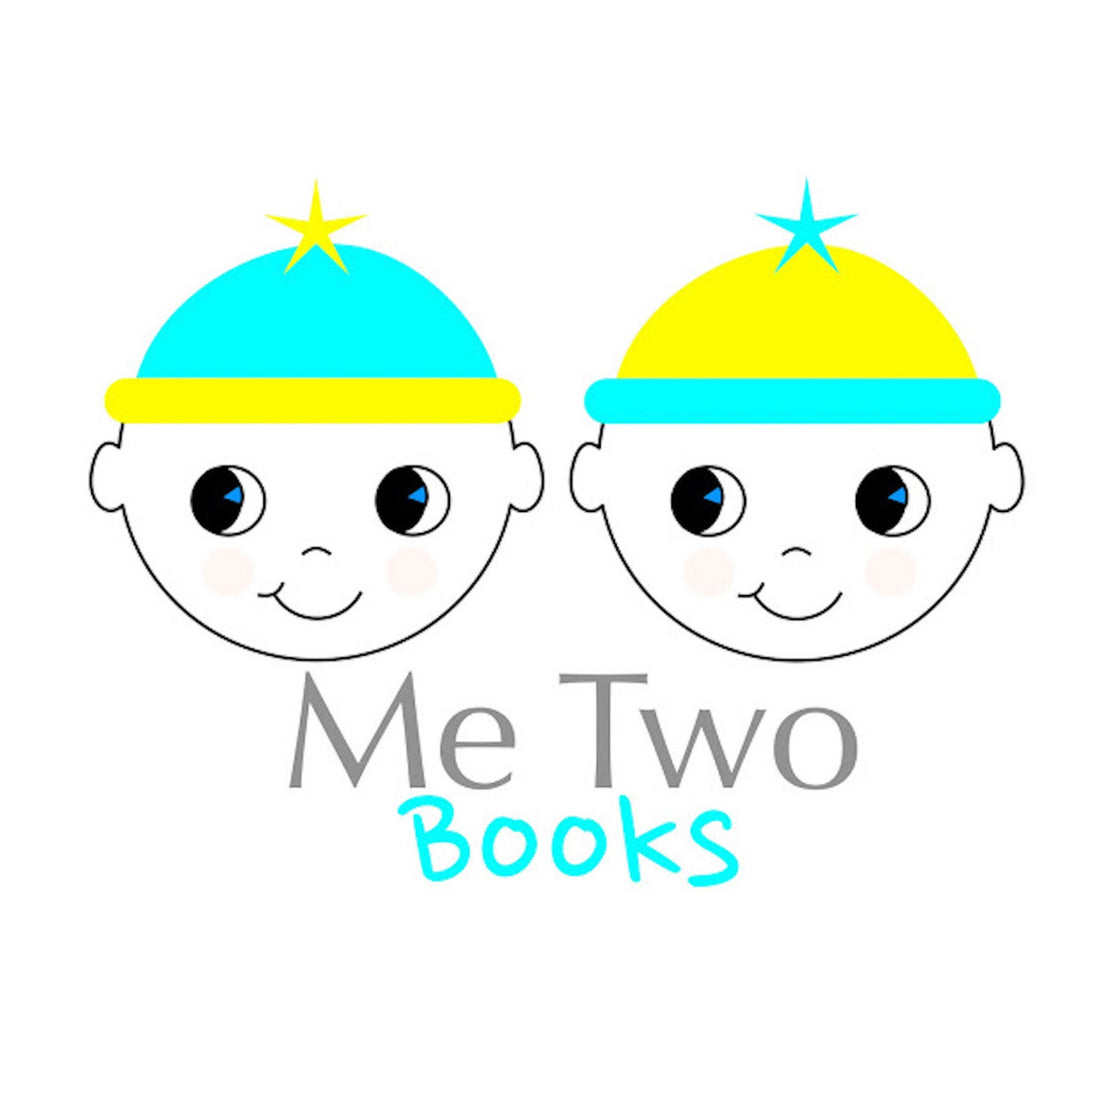 Me Two Books shares a free coloring page about Kangaroo Care